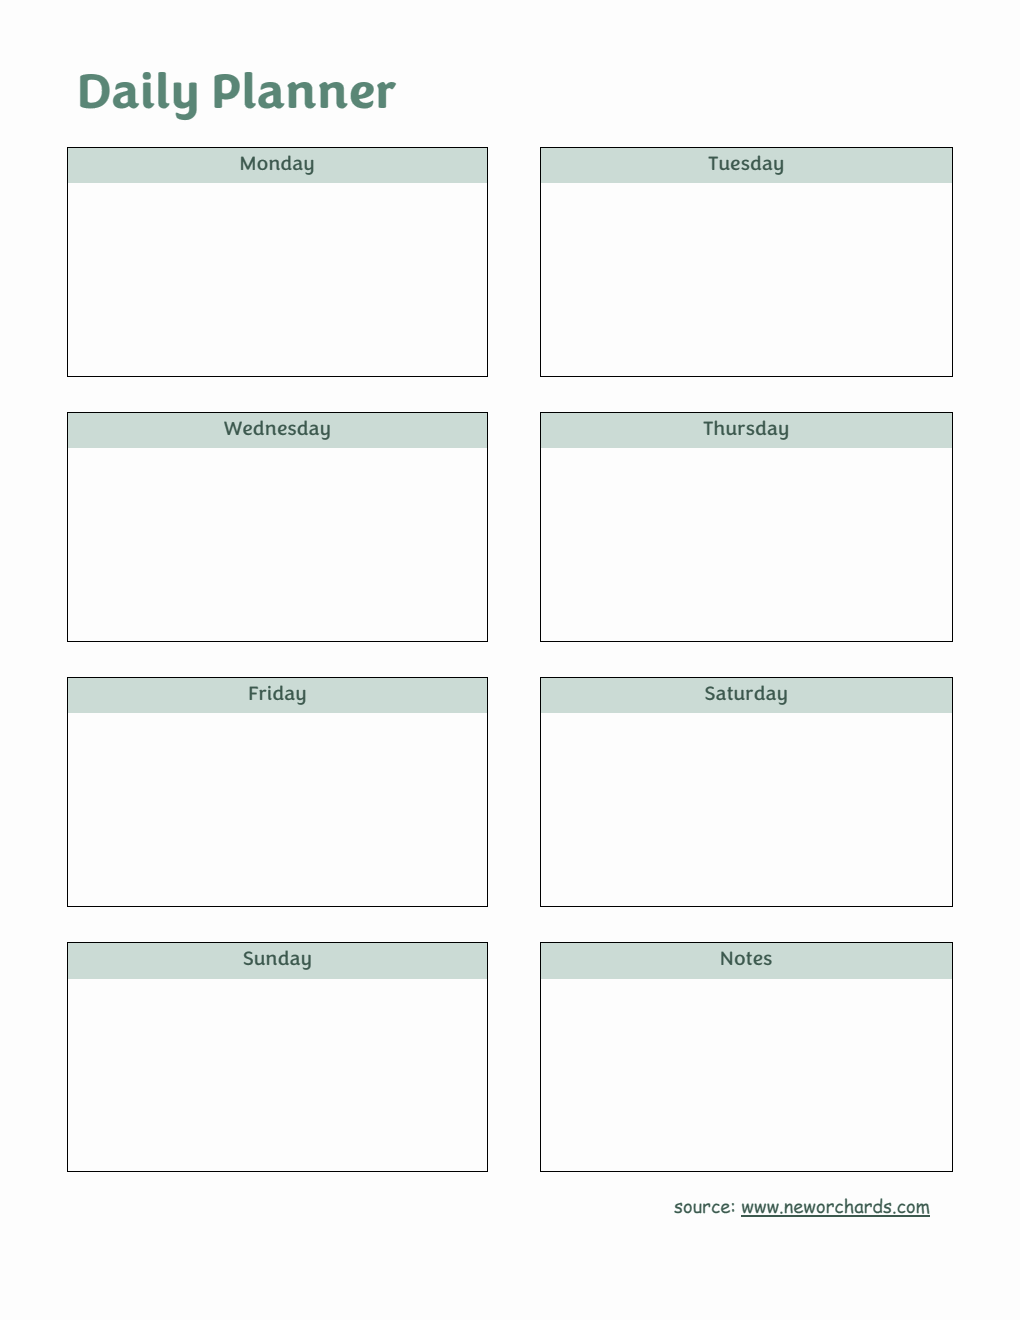 Daily Planner Template Editable in PDF